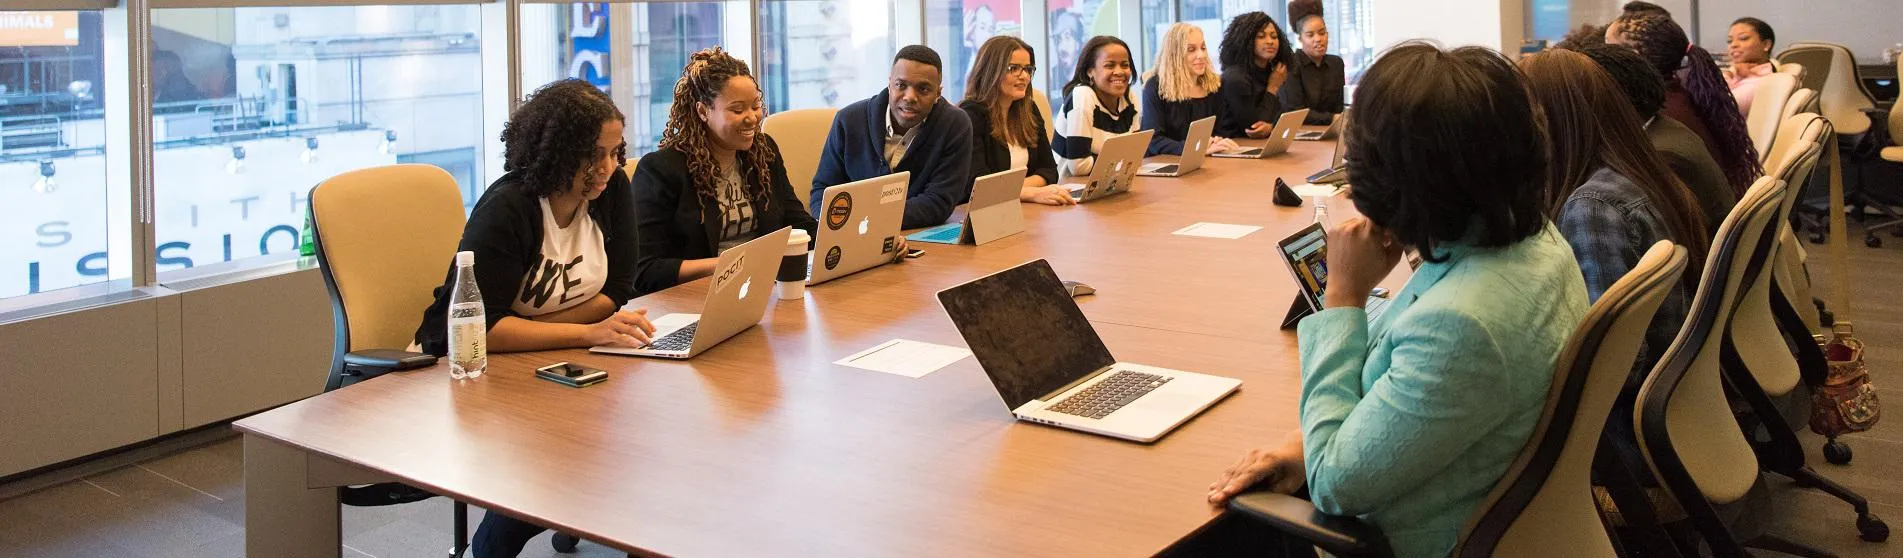 A diverse group of women and men around a boardroom table